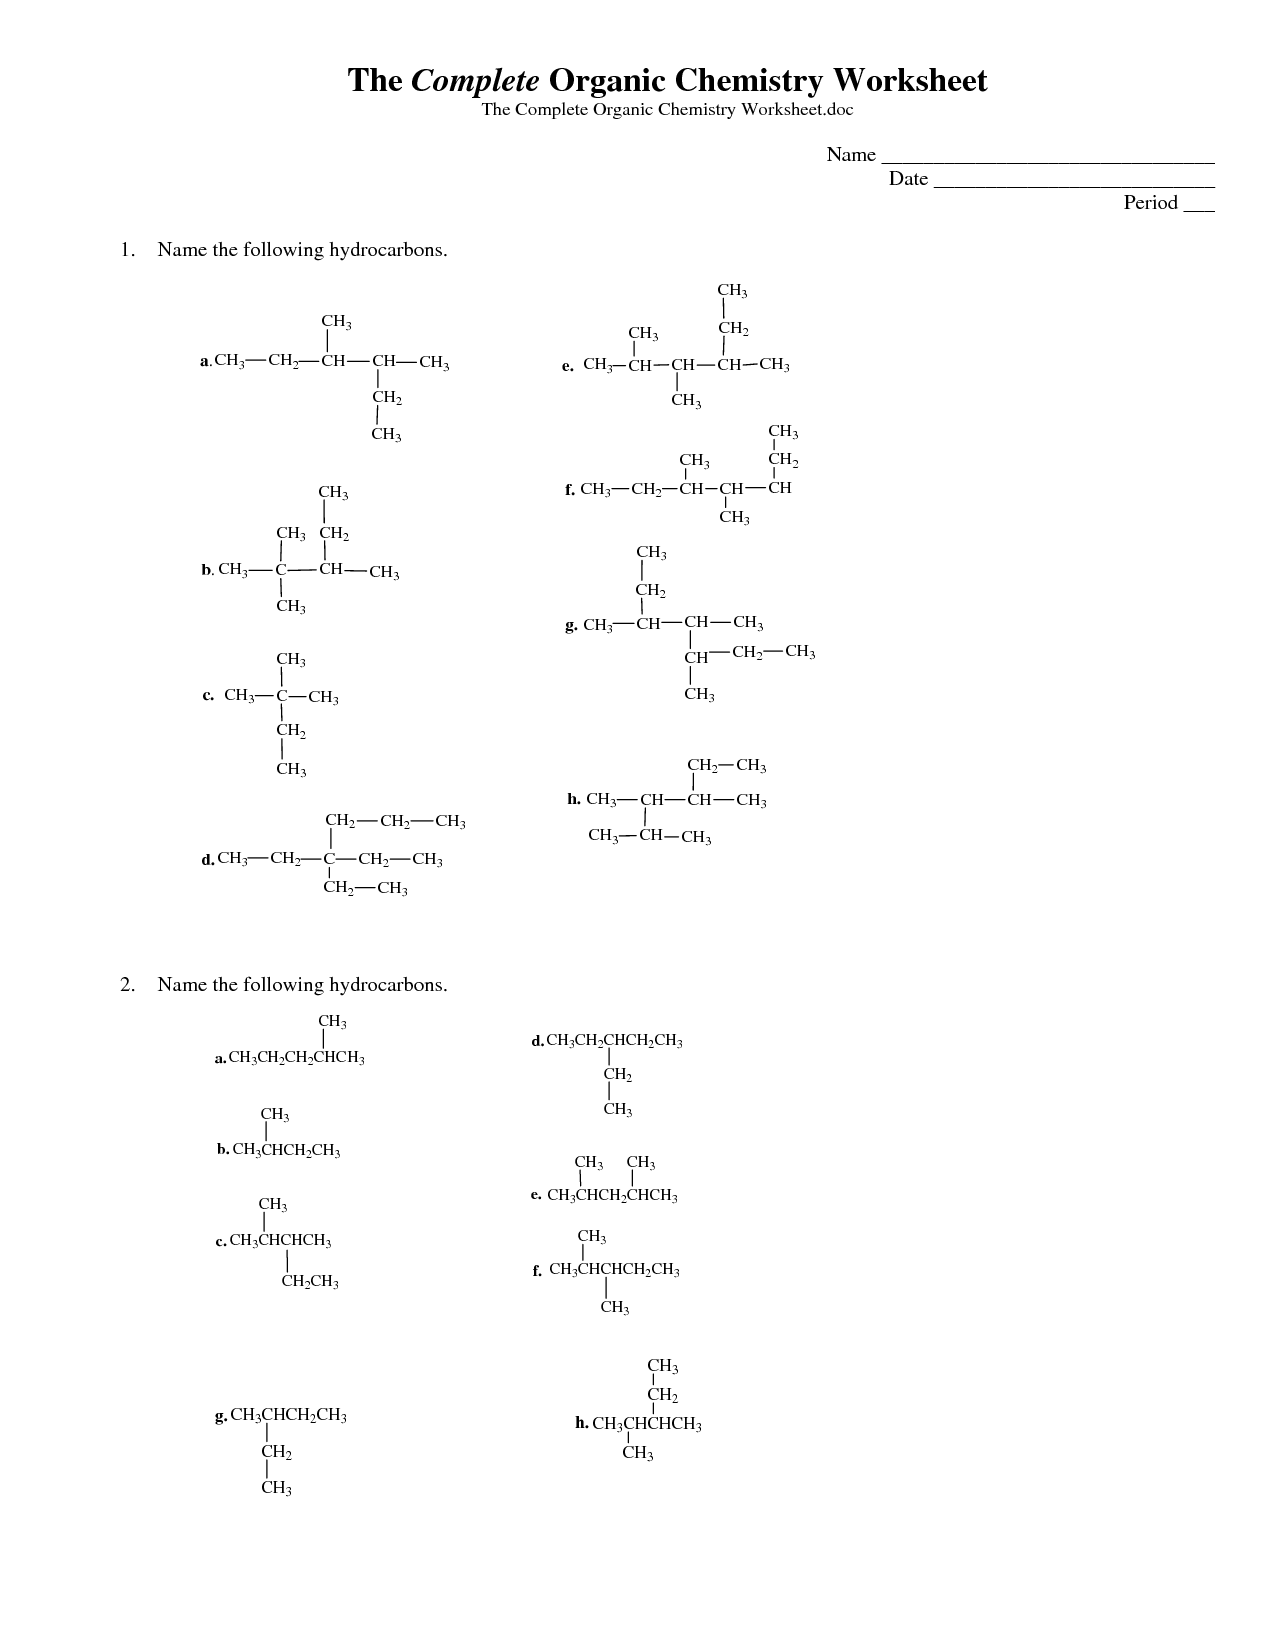 Chemistry Organic Compounds Worksheets Image